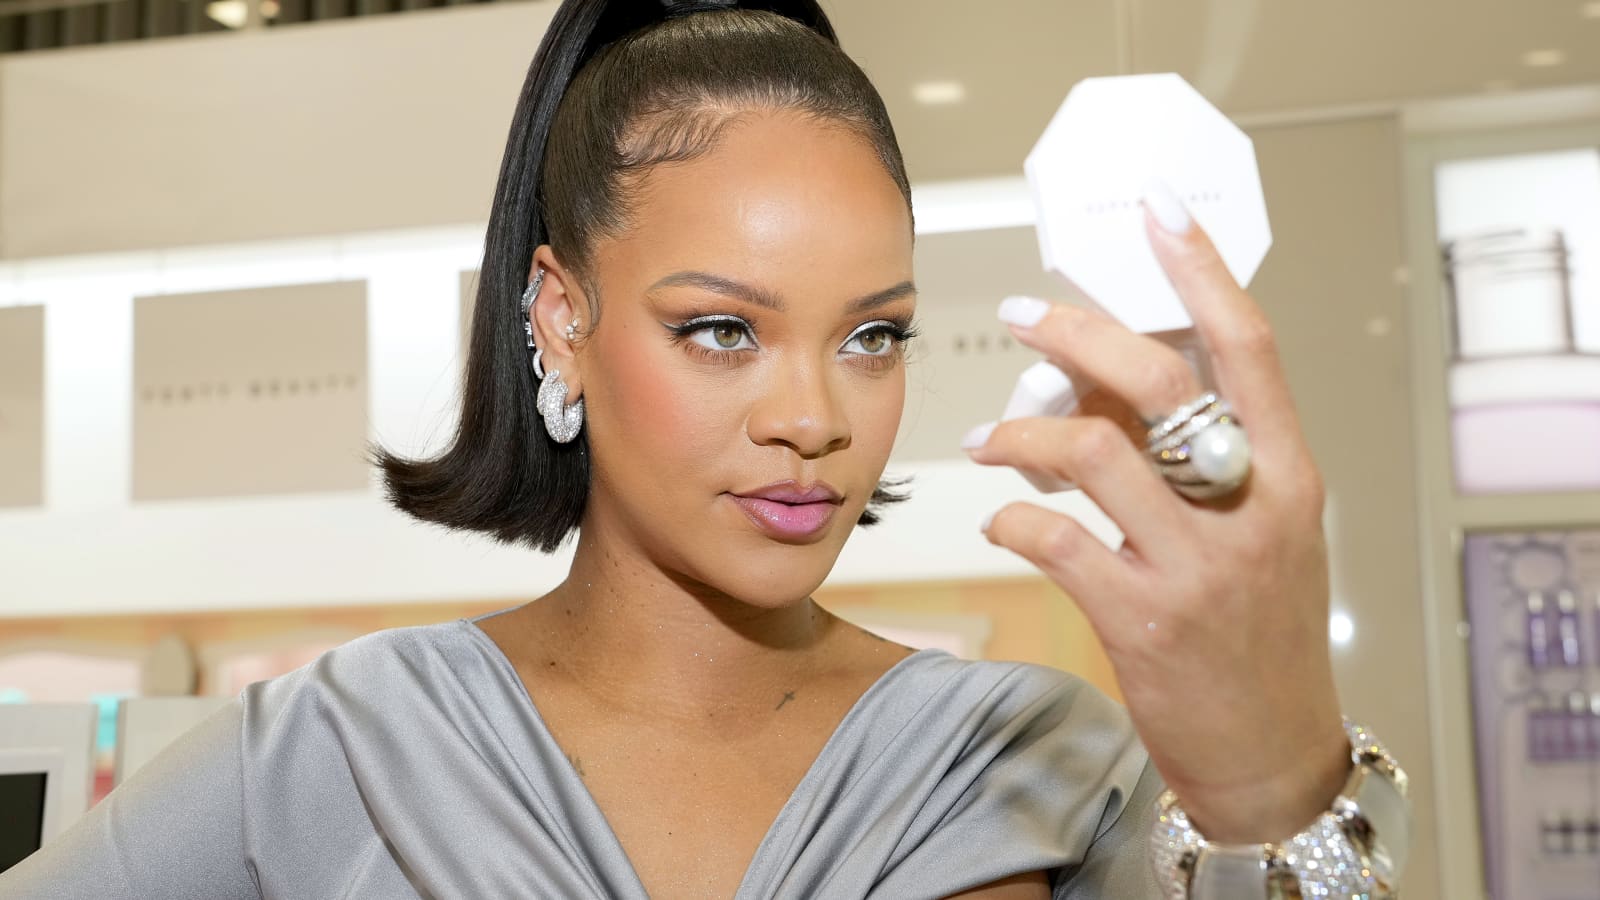 What we don't know about Rihanna. Rihanna is one of the most